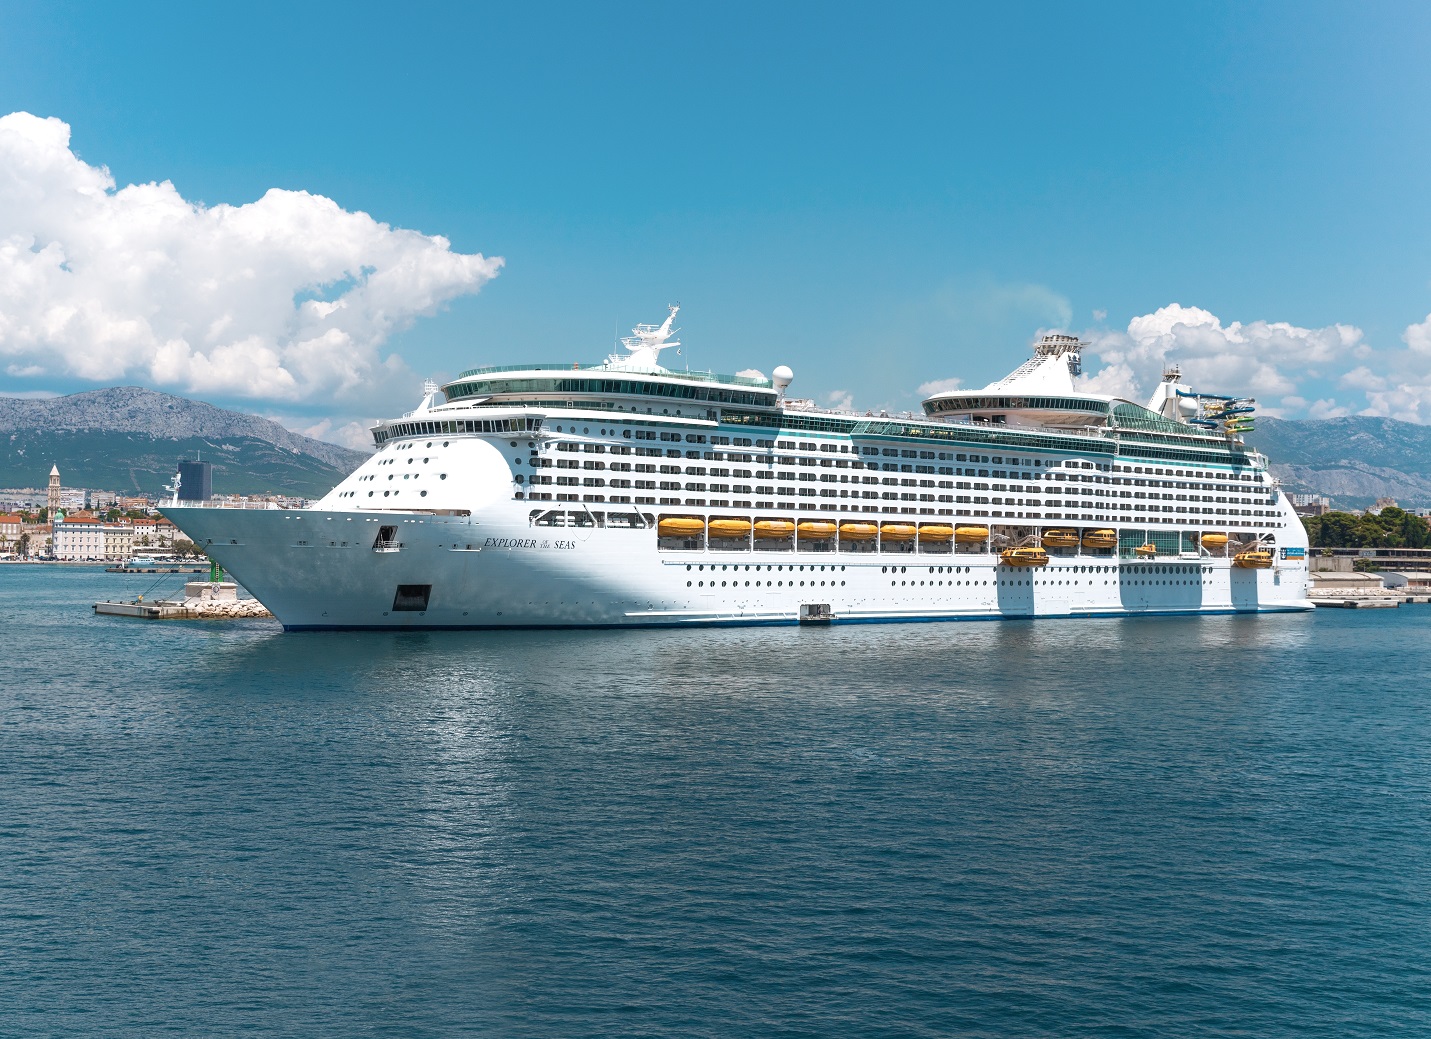 <p>In January of 2014, the Explorer of the cruise also experienced a sudden illness on board, causing them to actually return to port with a staggering number of violently ill passengers.</p>